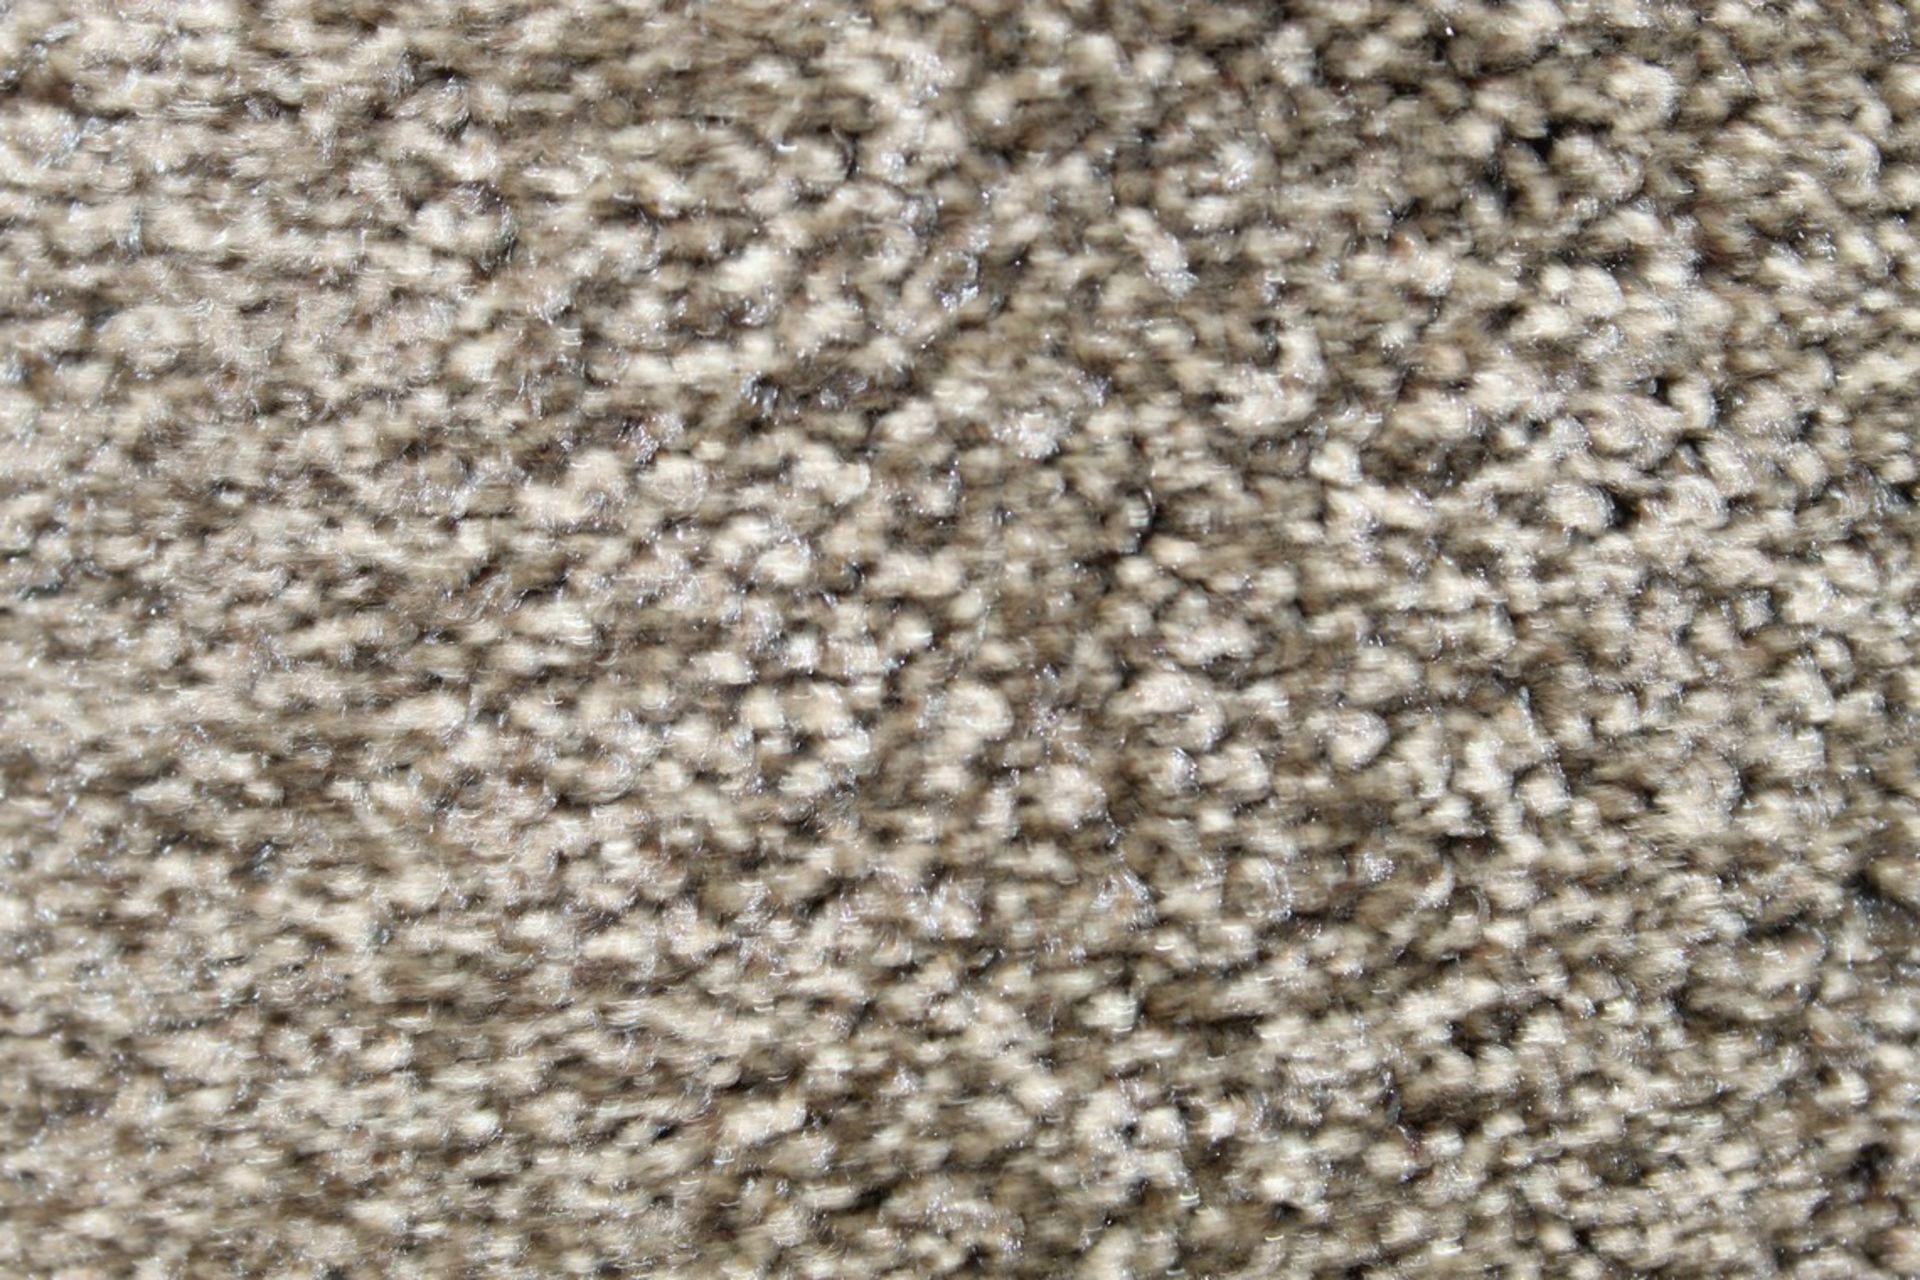 Villa Nova 680 Braun 160x230cm Rug RRP £140 (Appraisals Available On Request)(Pictures For